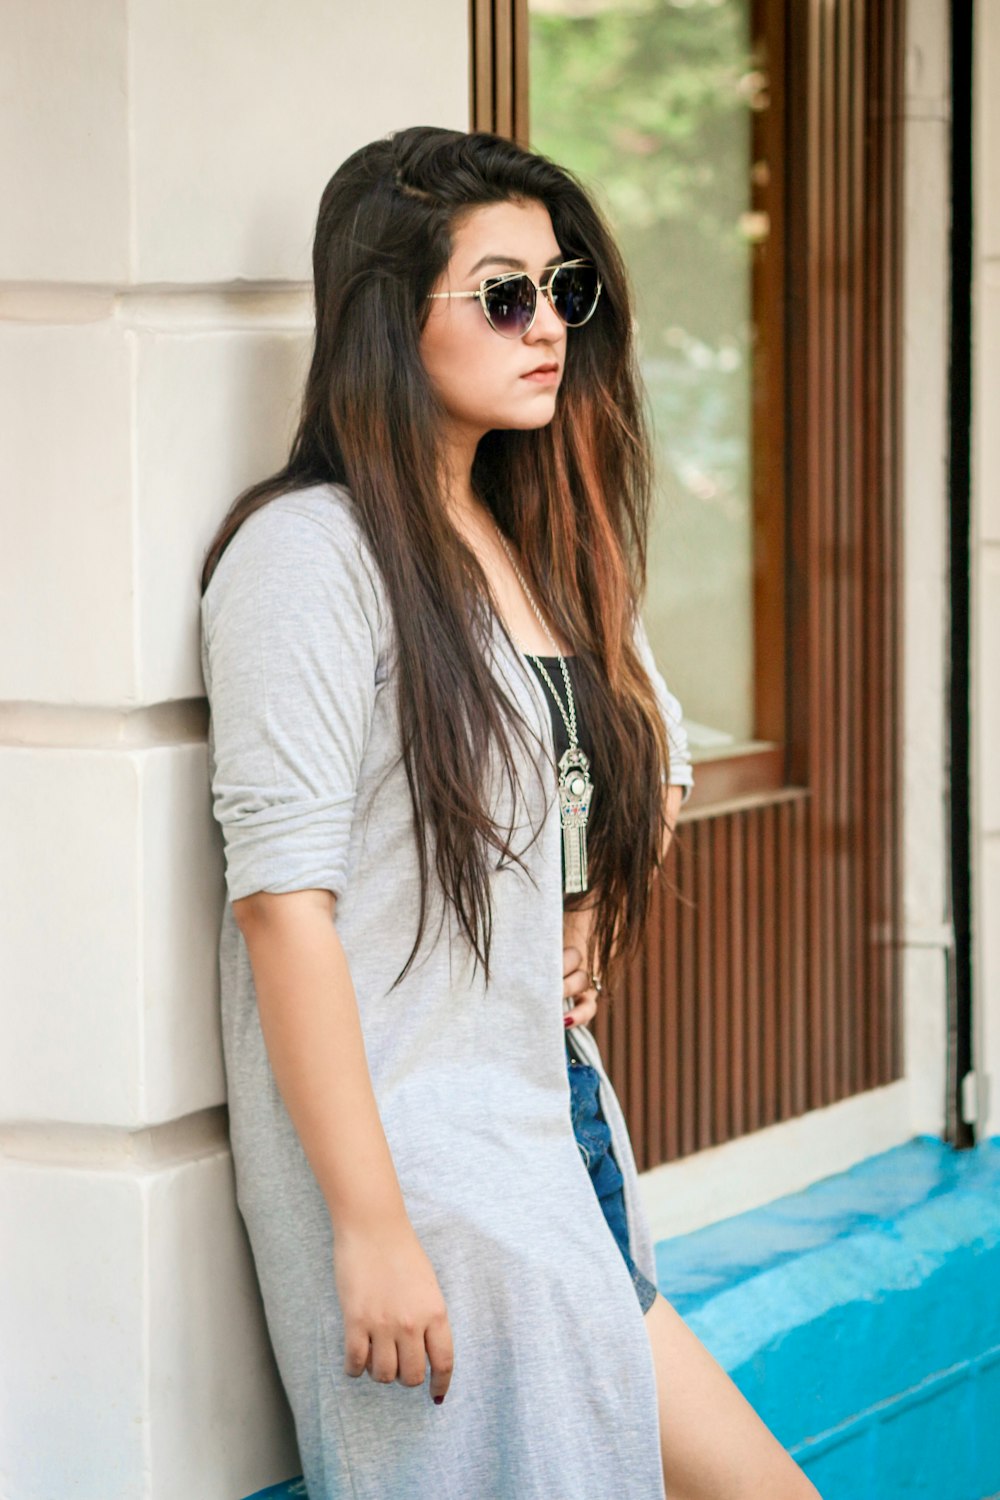 a woman leaning against a wall wearing sunglasses